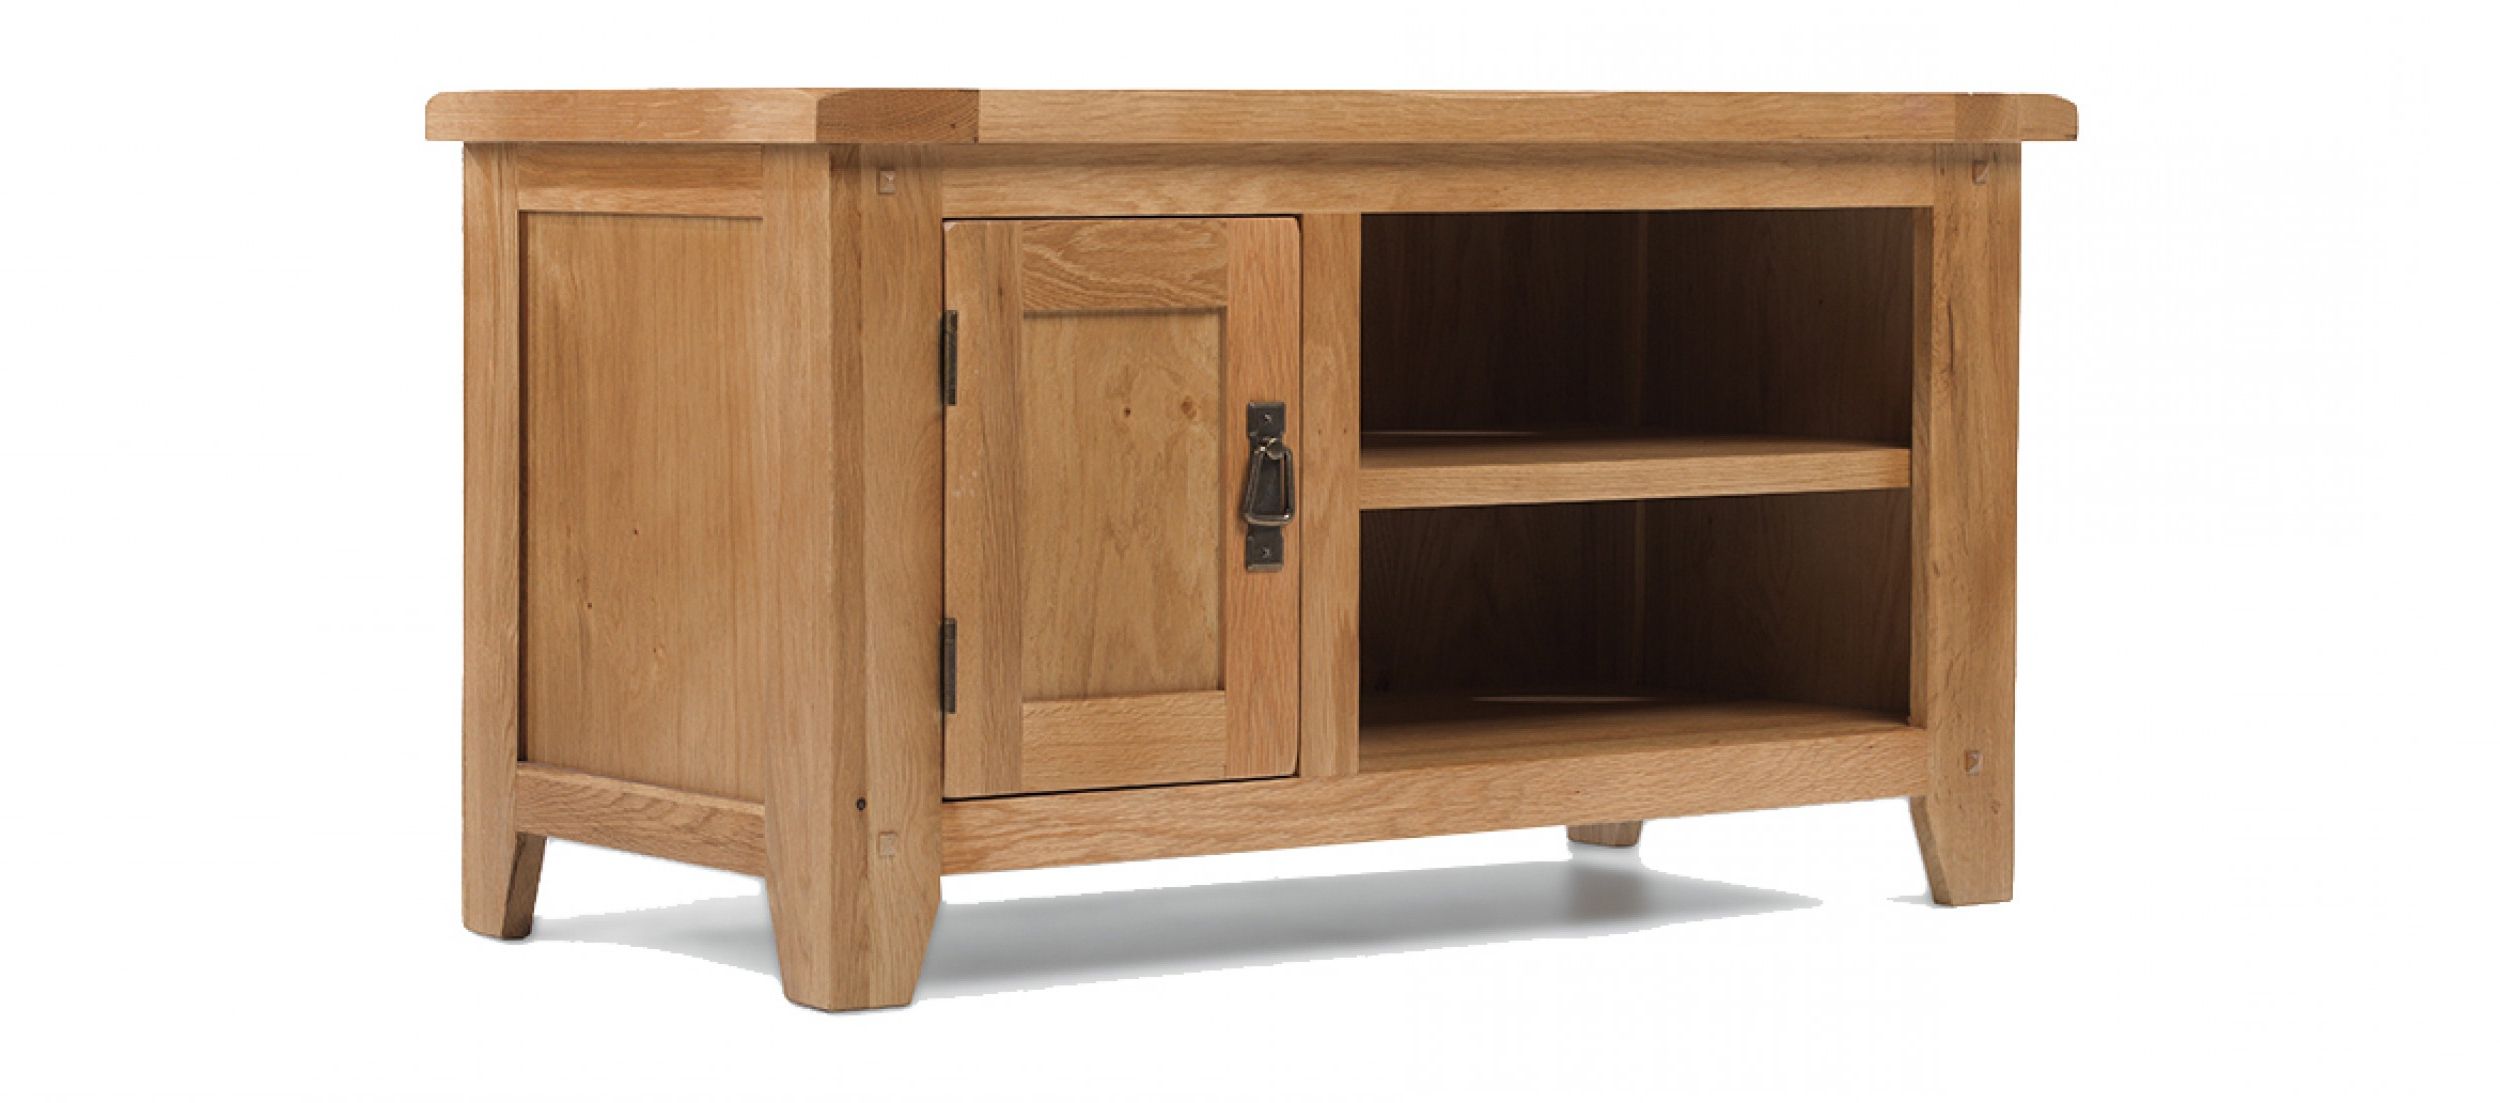 Contemporary Oak Tv Cabinets In Fashionable Rustic Oak Tv Unit (View 13 of 20)